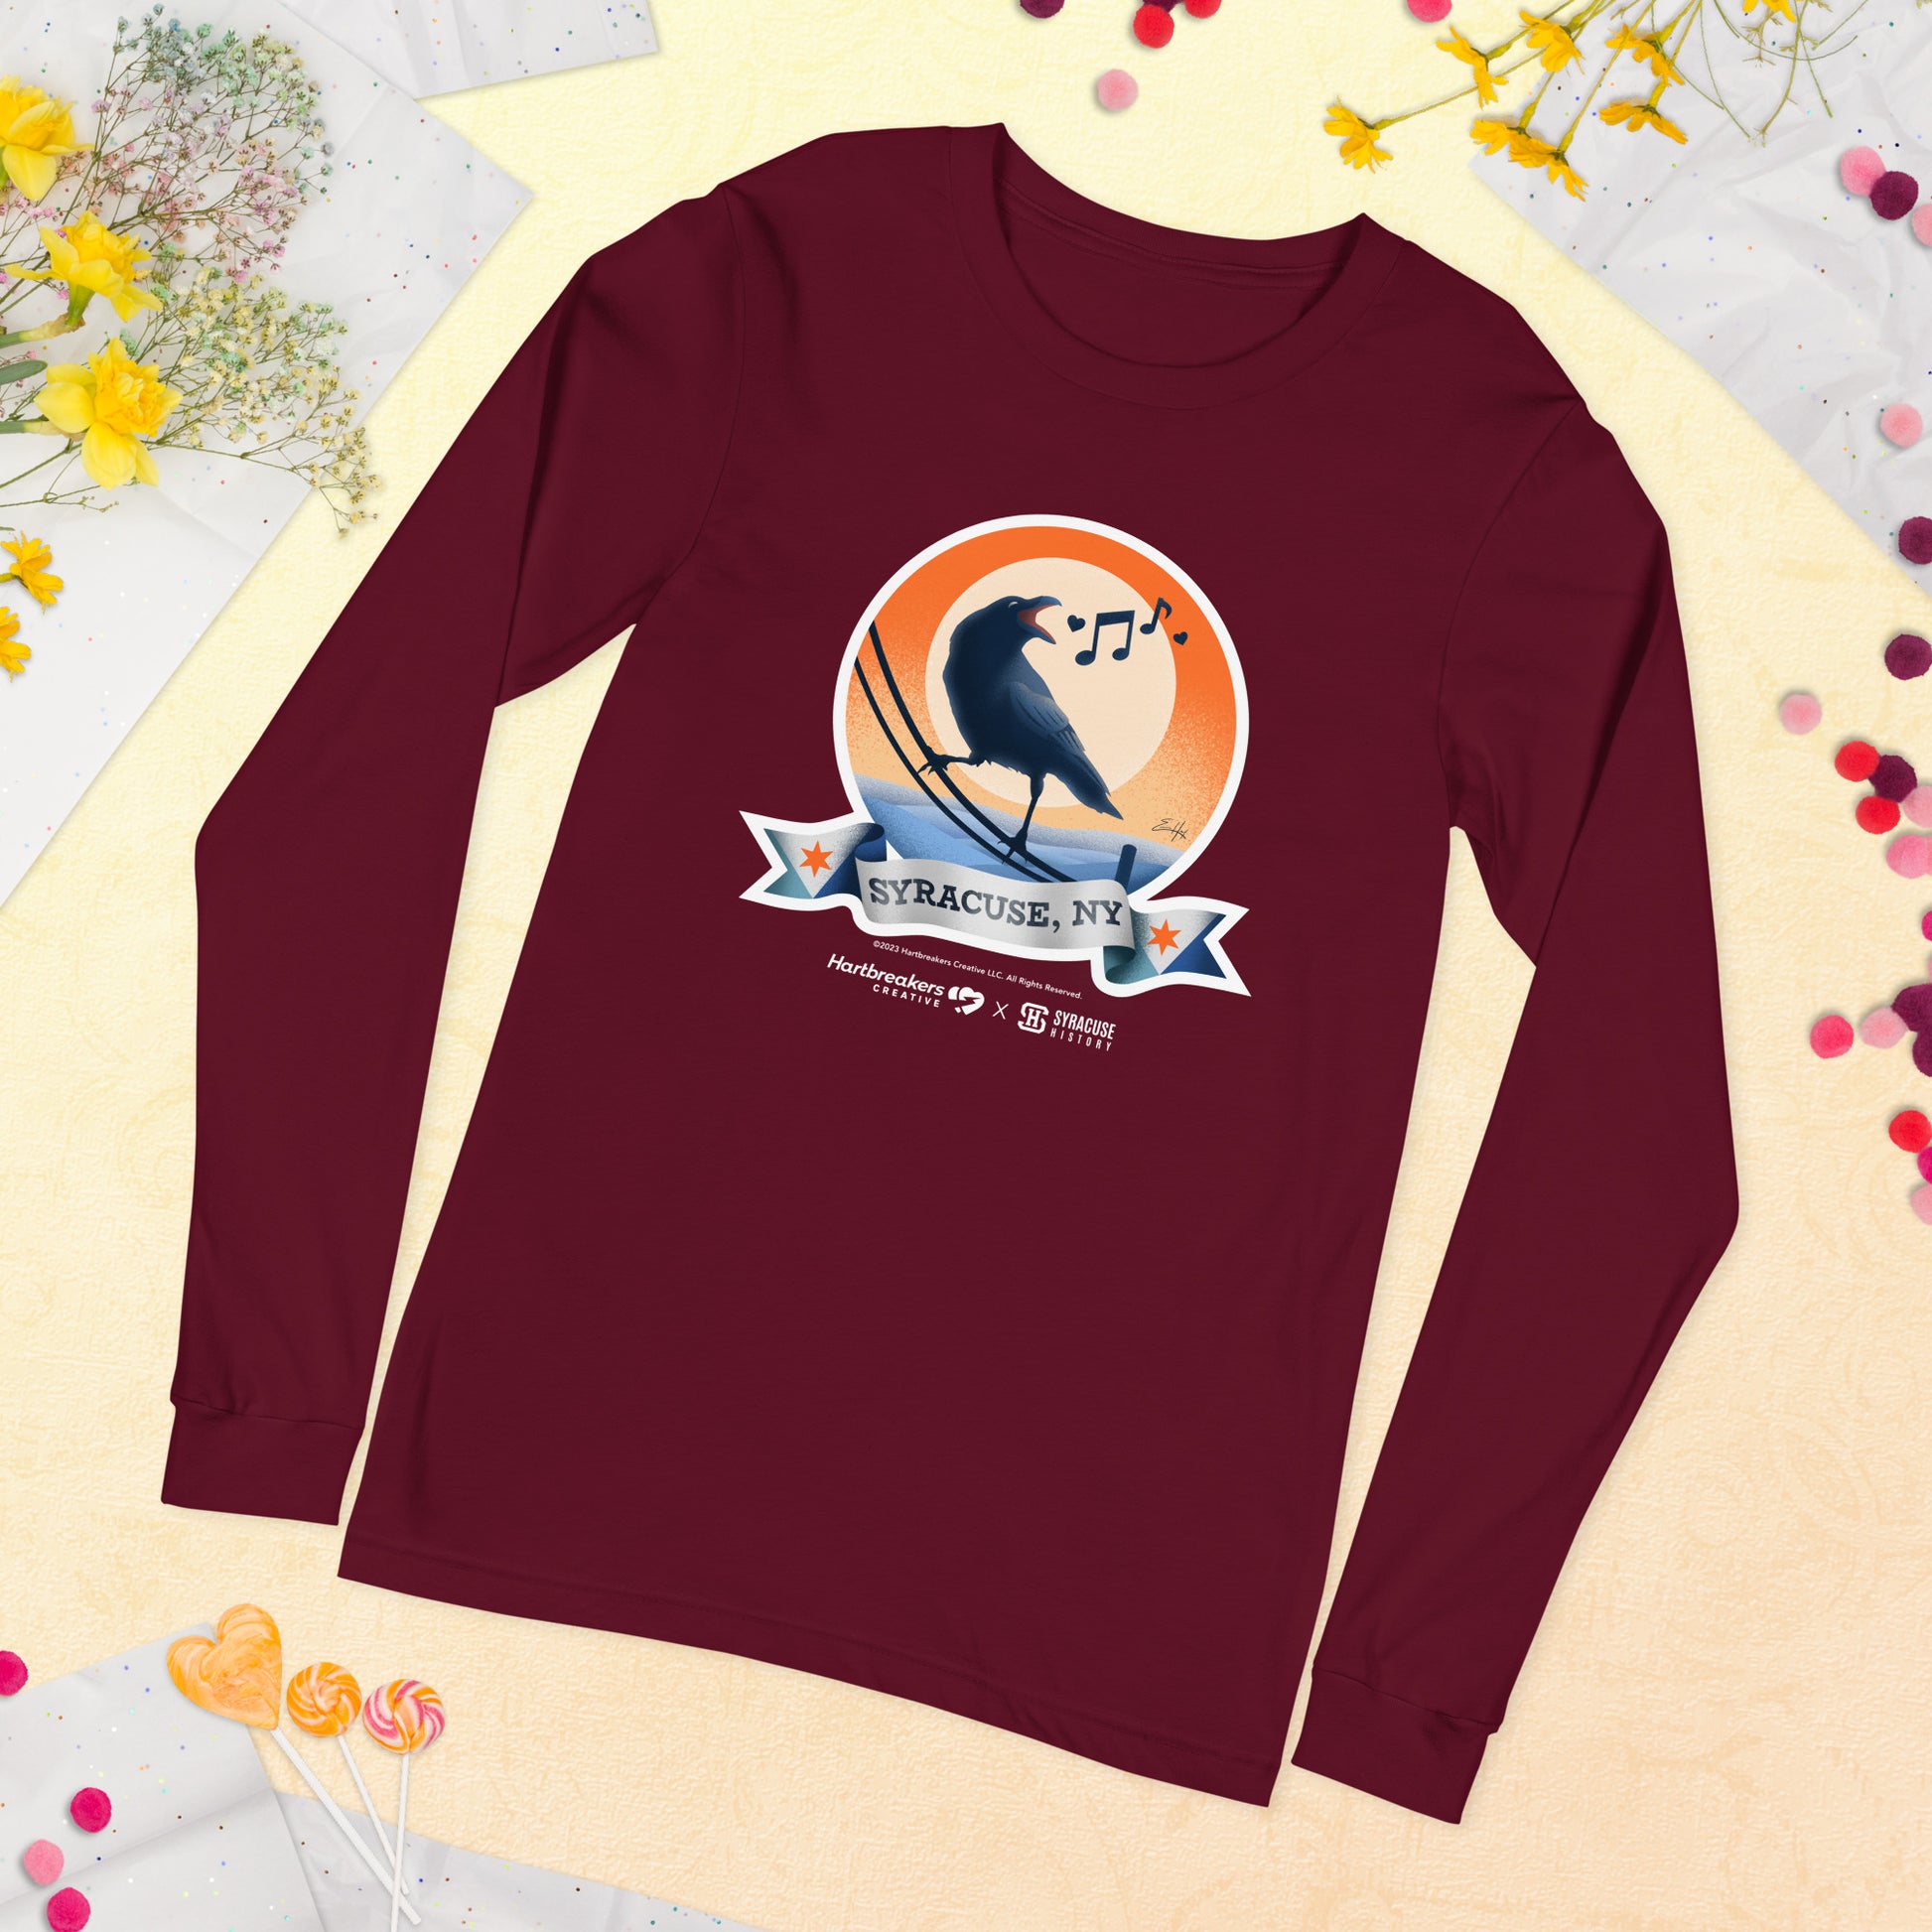 A maroon long sleeve T-shirt featuring an illustration of a crow on a telephone wire and a banner beneath it that says Syracuse, NY